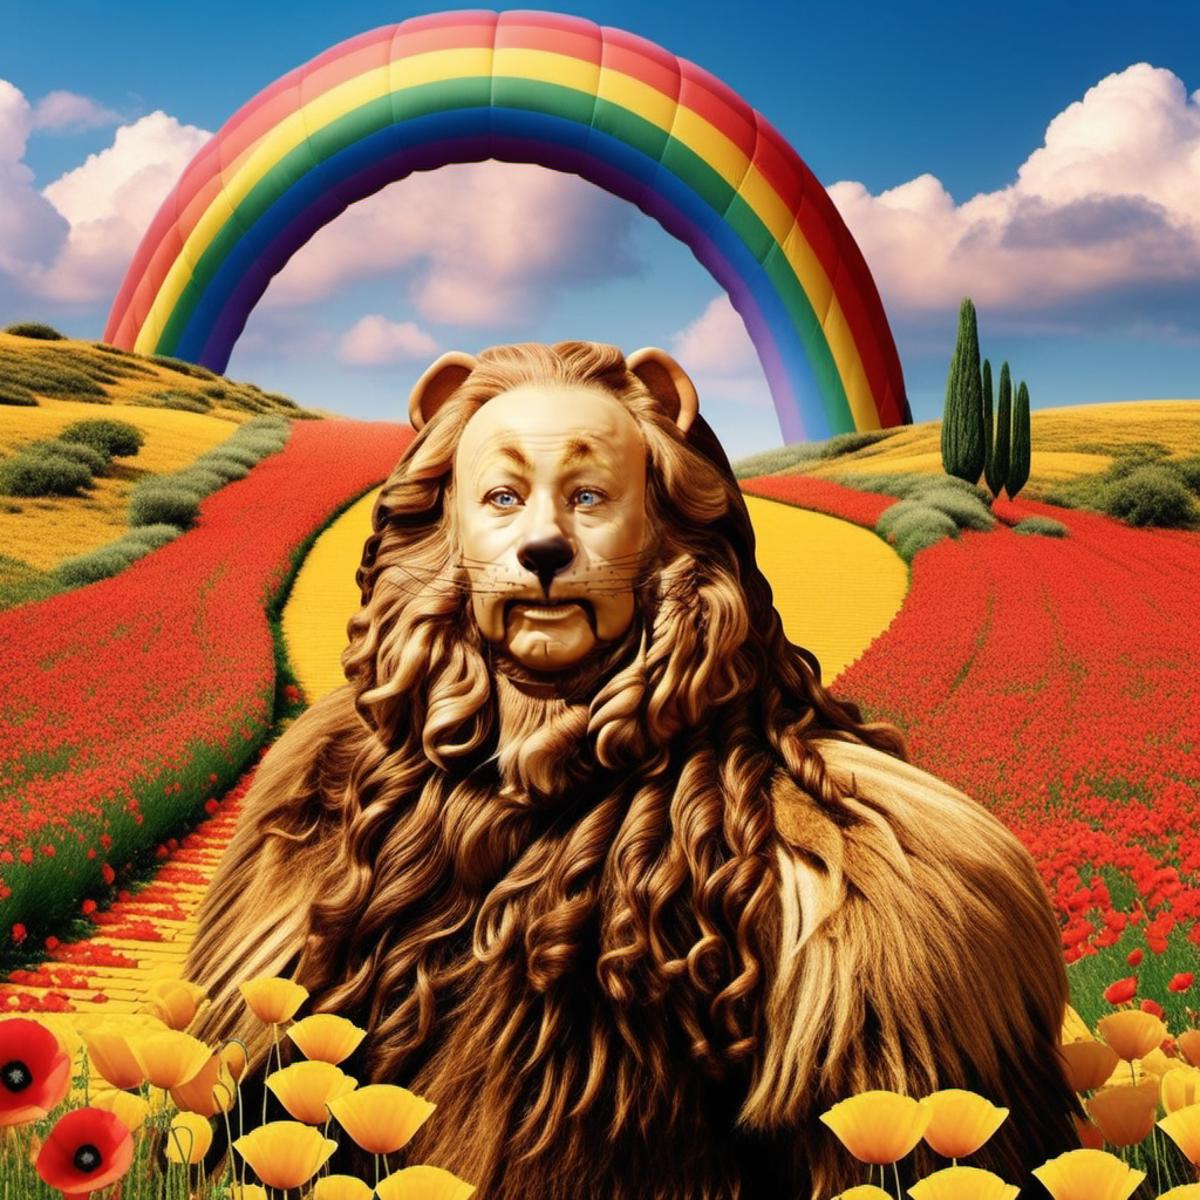 The Cowardly Lion - Wizard of Oz - SDXL image by PhotobAIt